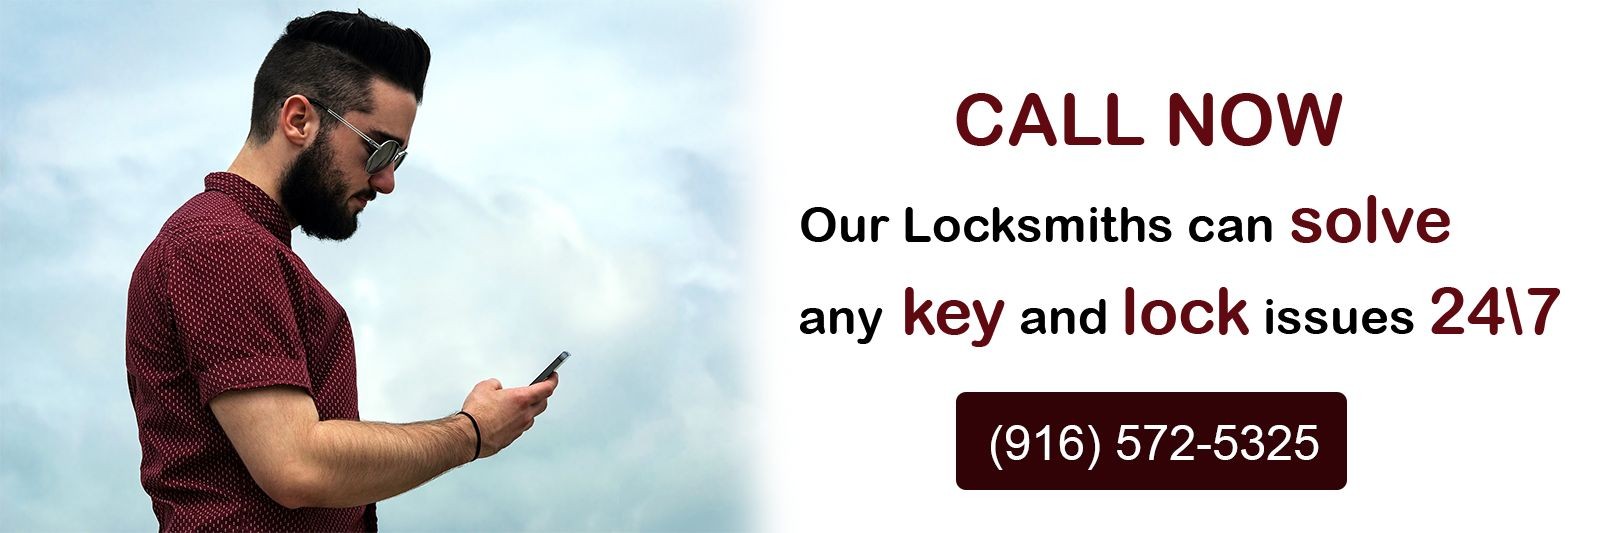 24 Hour Locksmith Services | Affordable Services - Low Rate Locksmith